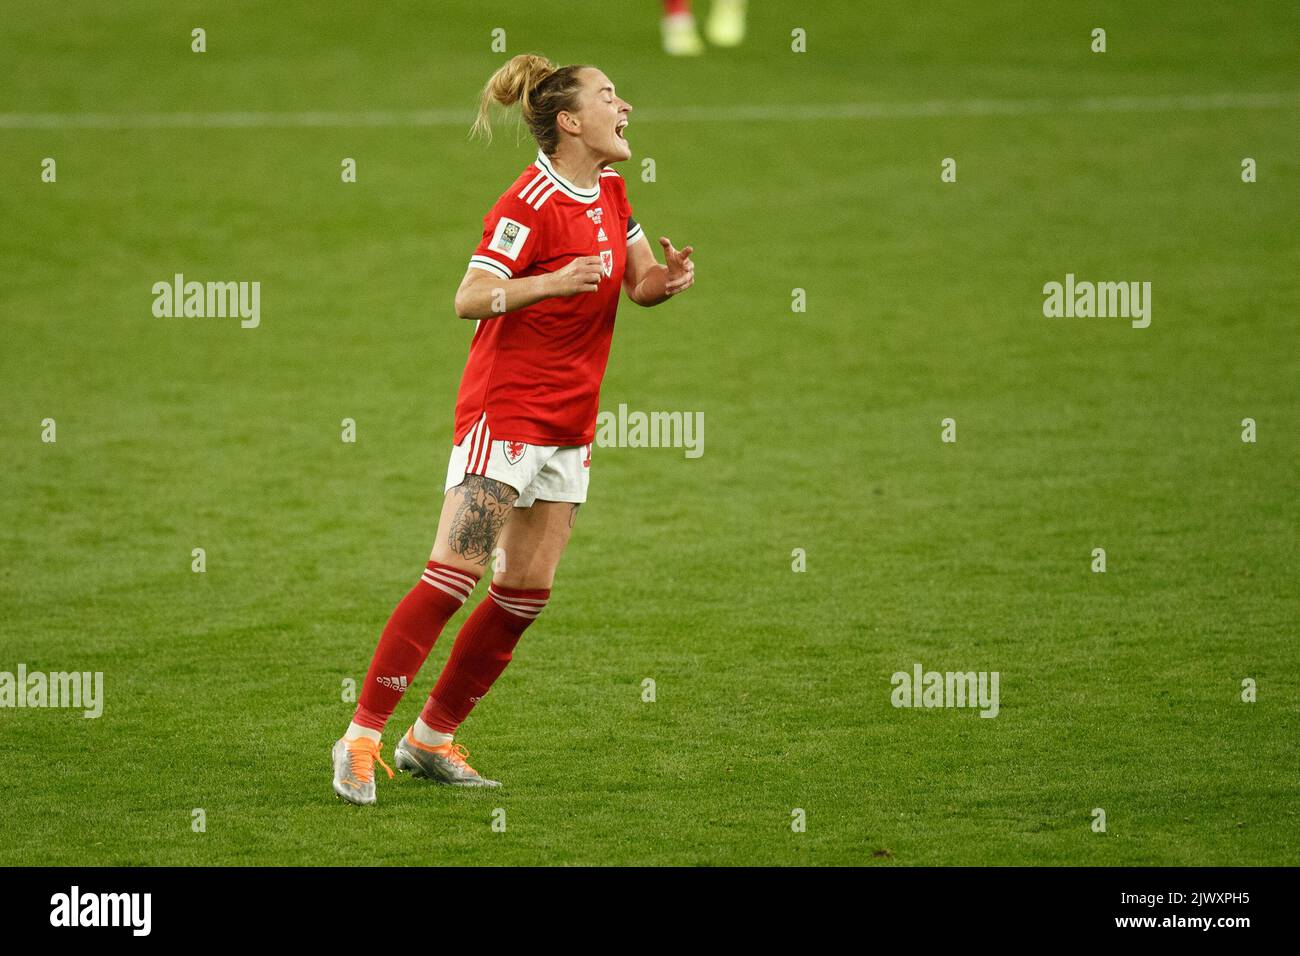 Cardiff, UK. 6th Sep, 2022. Rachel Rowe of Wales reacts after going close during the Wales v Slovenia Women's World Cup Qualification match. Credit: Gruffydd Thomas/Alamy Live News Stock Photo